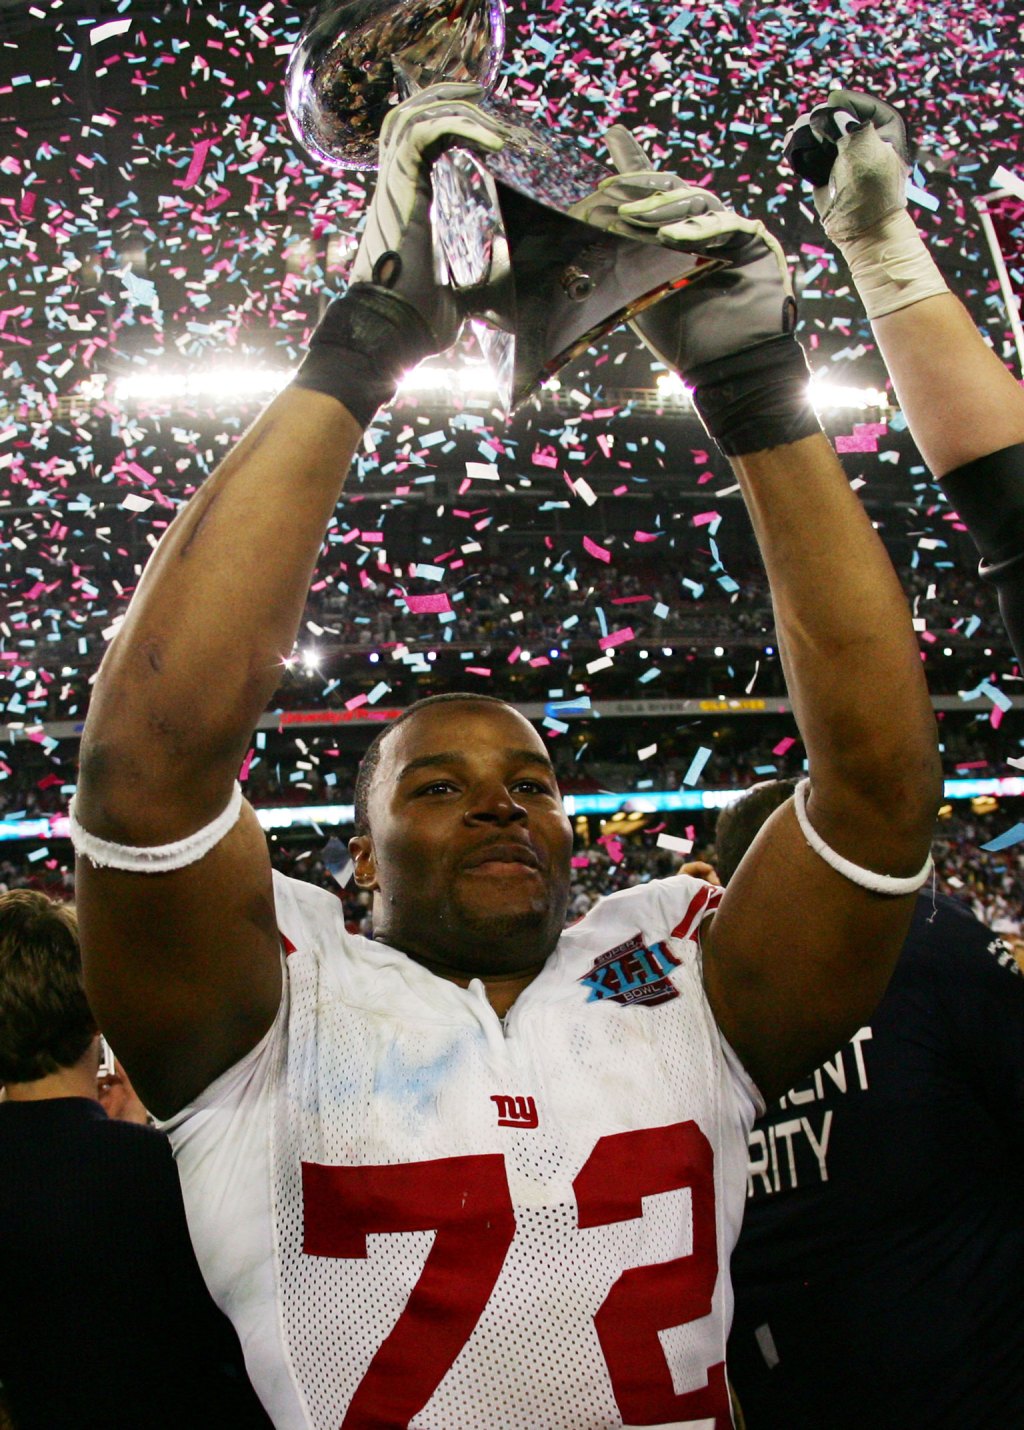 Two-time Super Bowl winner Osi Umenyiora of the New York Giants lifts the trophy after defeating the New England Patriots 17-14 in Super Bowl XLII on February 3, 2008. Image credit: Harry How/Getty Images